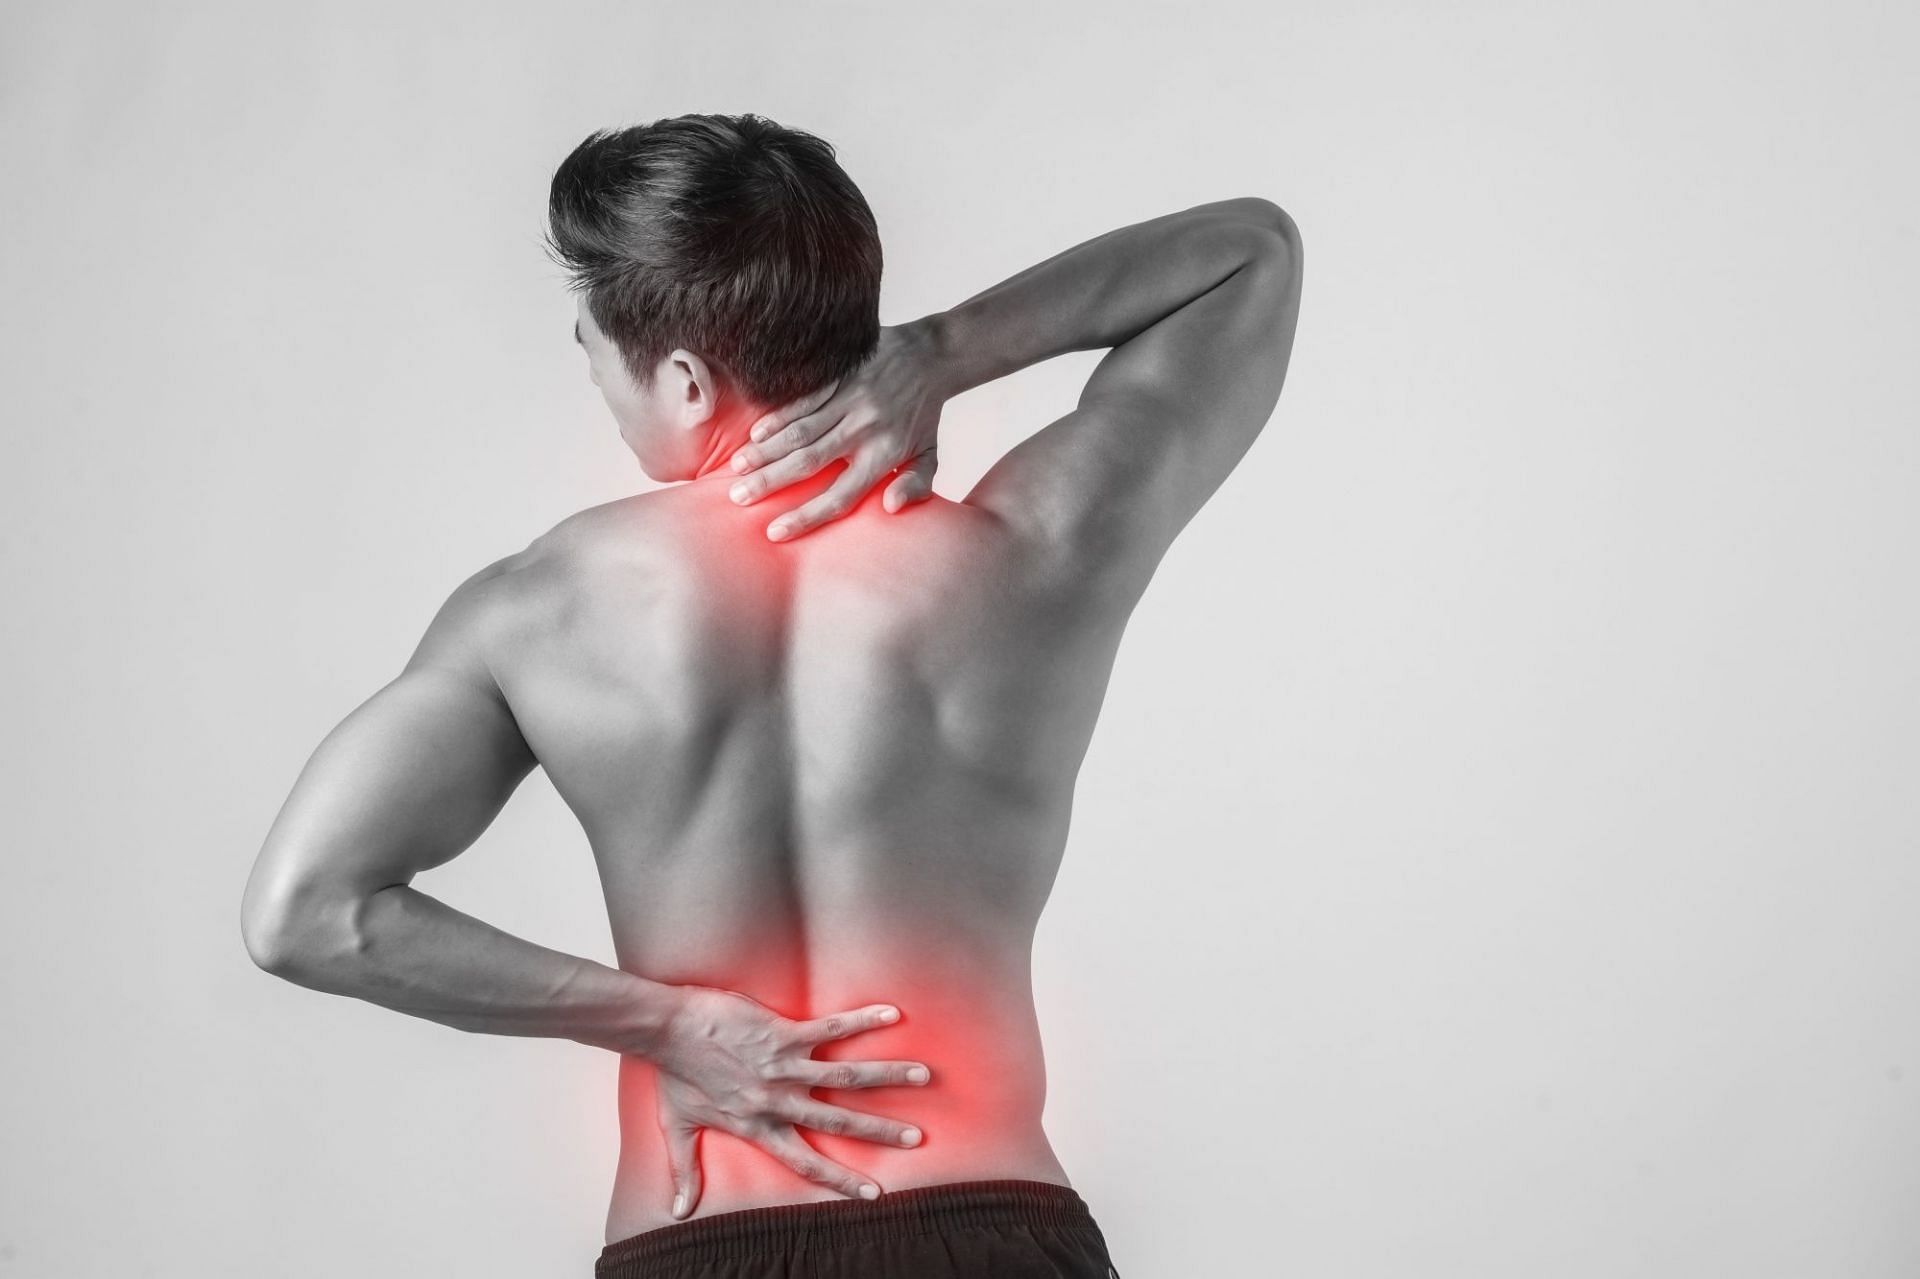 Magnesium for muscle pain : is it effective ? (Image by jcomp on Freepik)